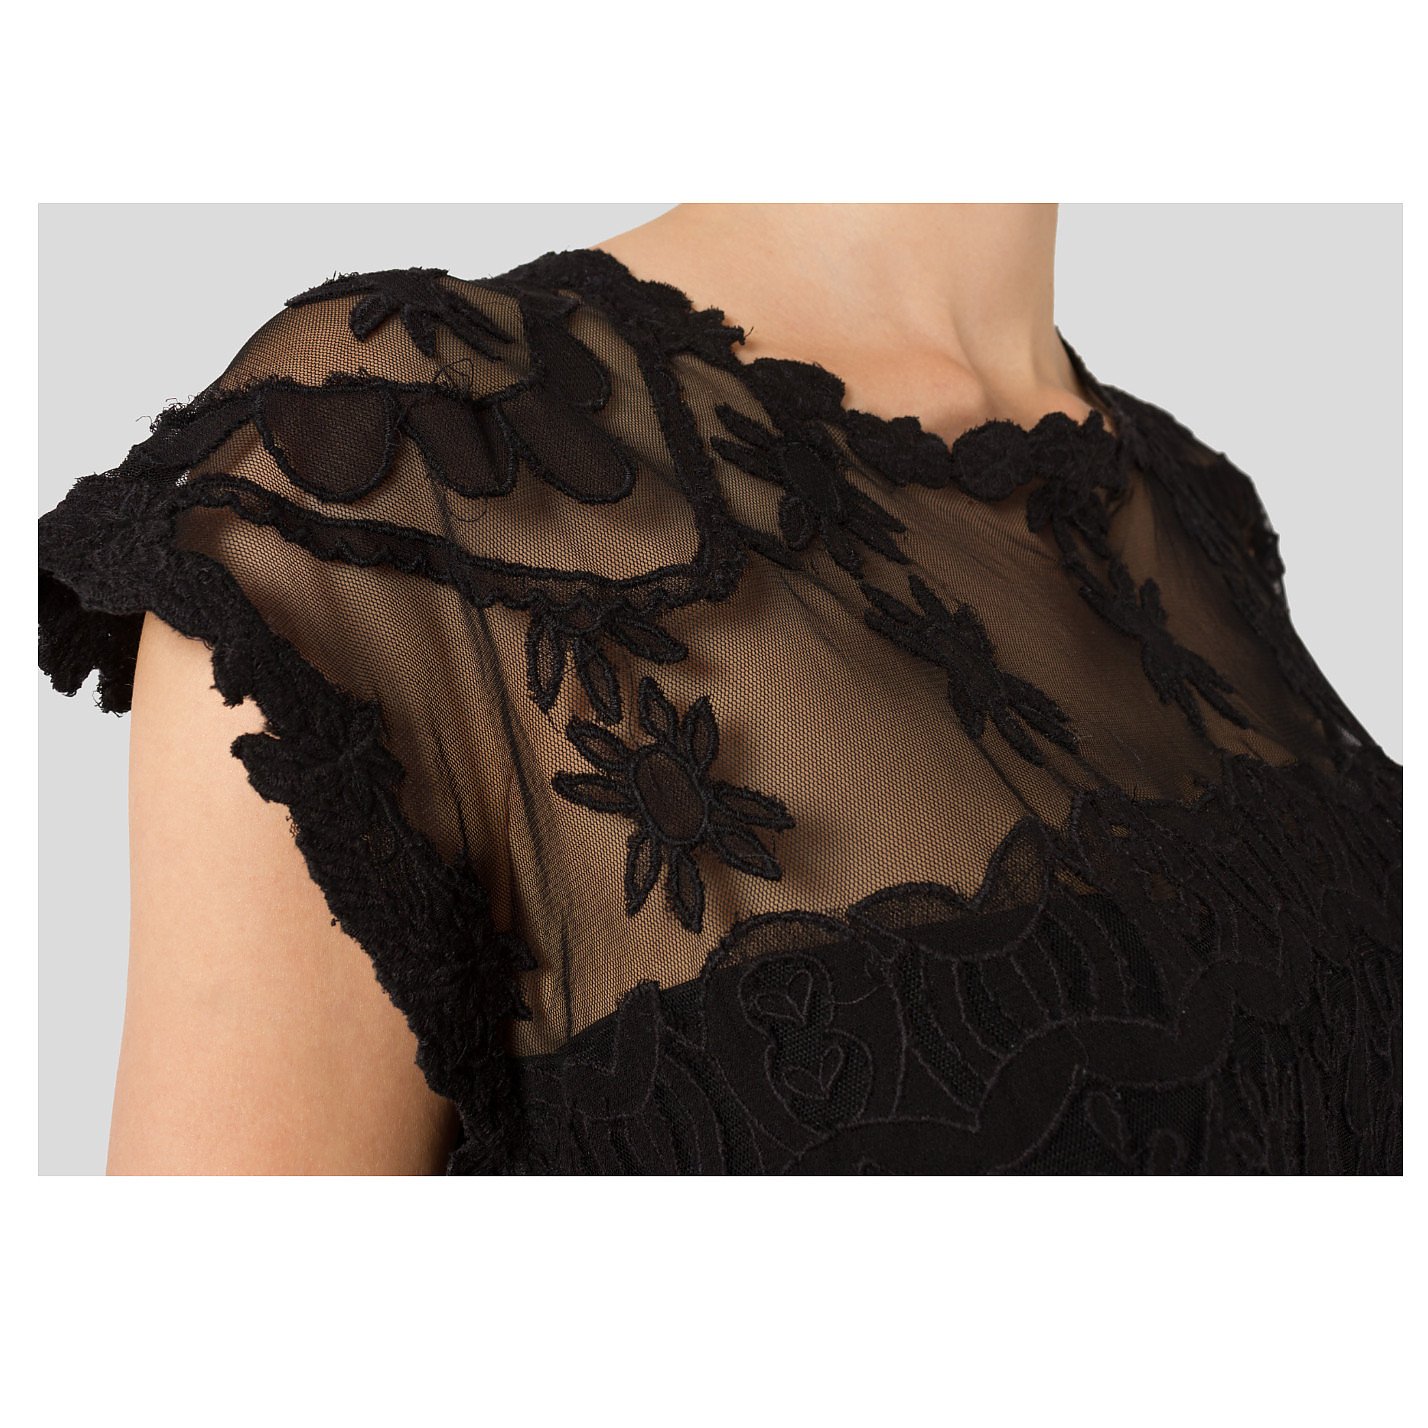 Zadig & Voltaire Lace Embroidered Top